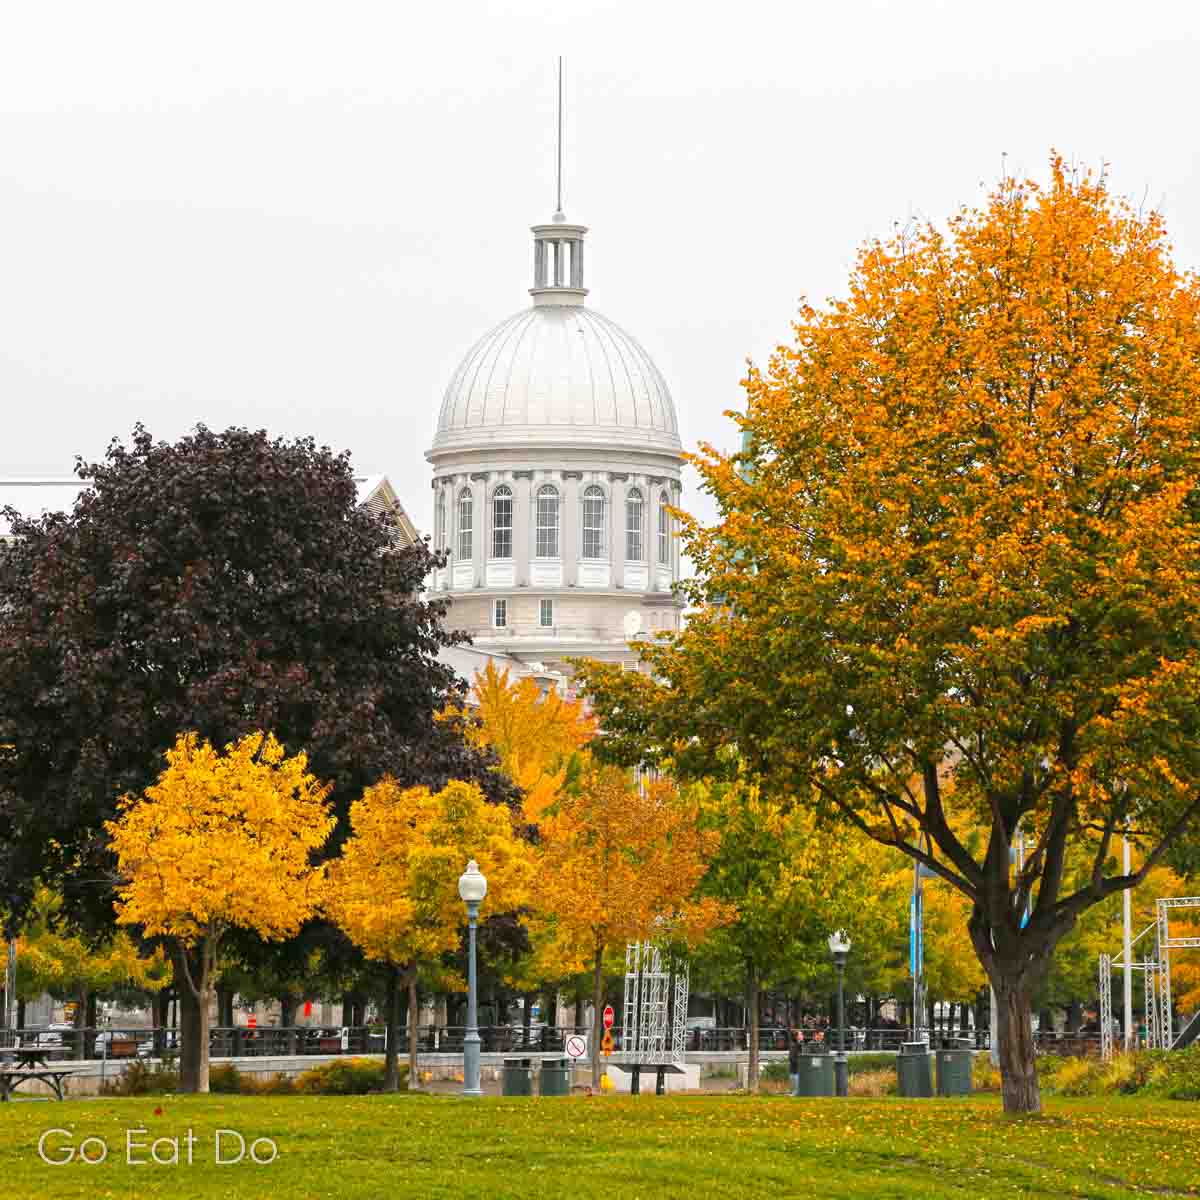 Bonsecours Market amid autumn foliage in Montreal.